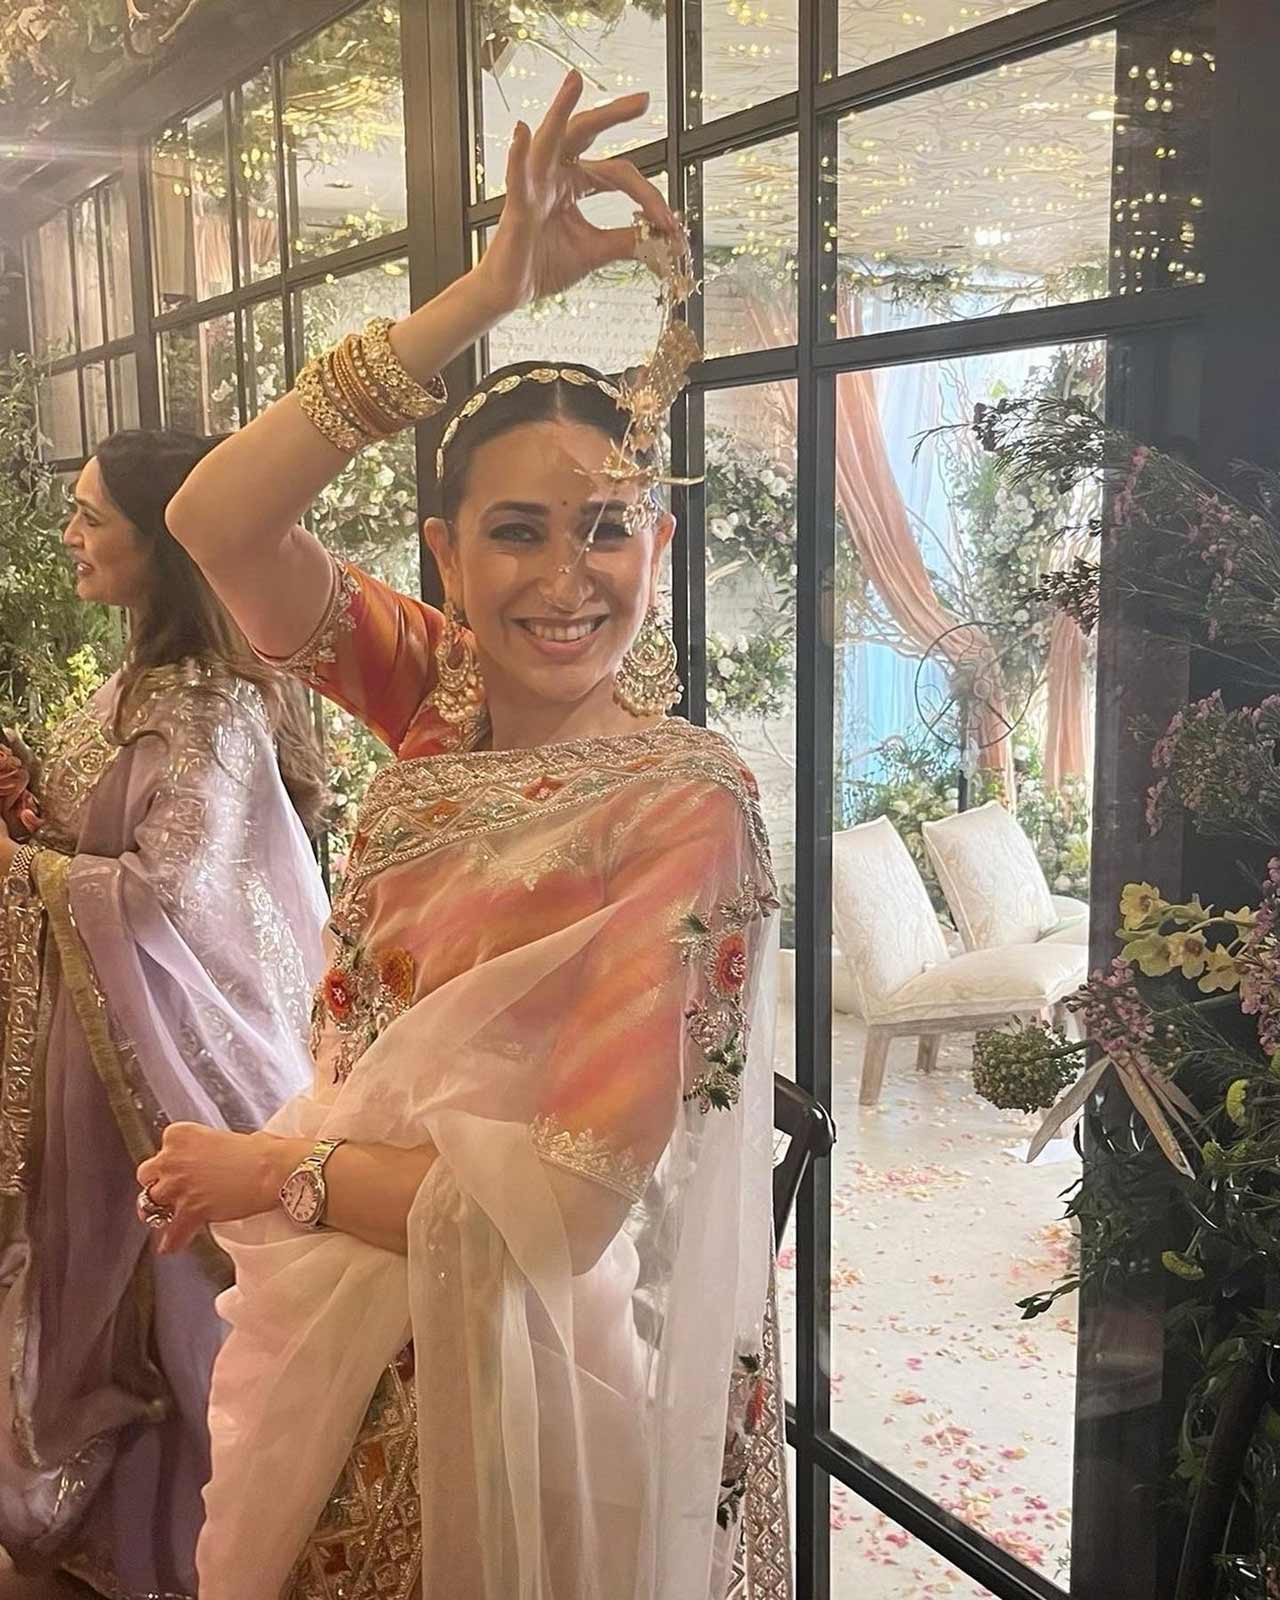 After a few days after the wedding, Alia Bhatt treated fans to glimpses of her Mehendi ceremony from her intimate wedding with Ranbir Kapoor